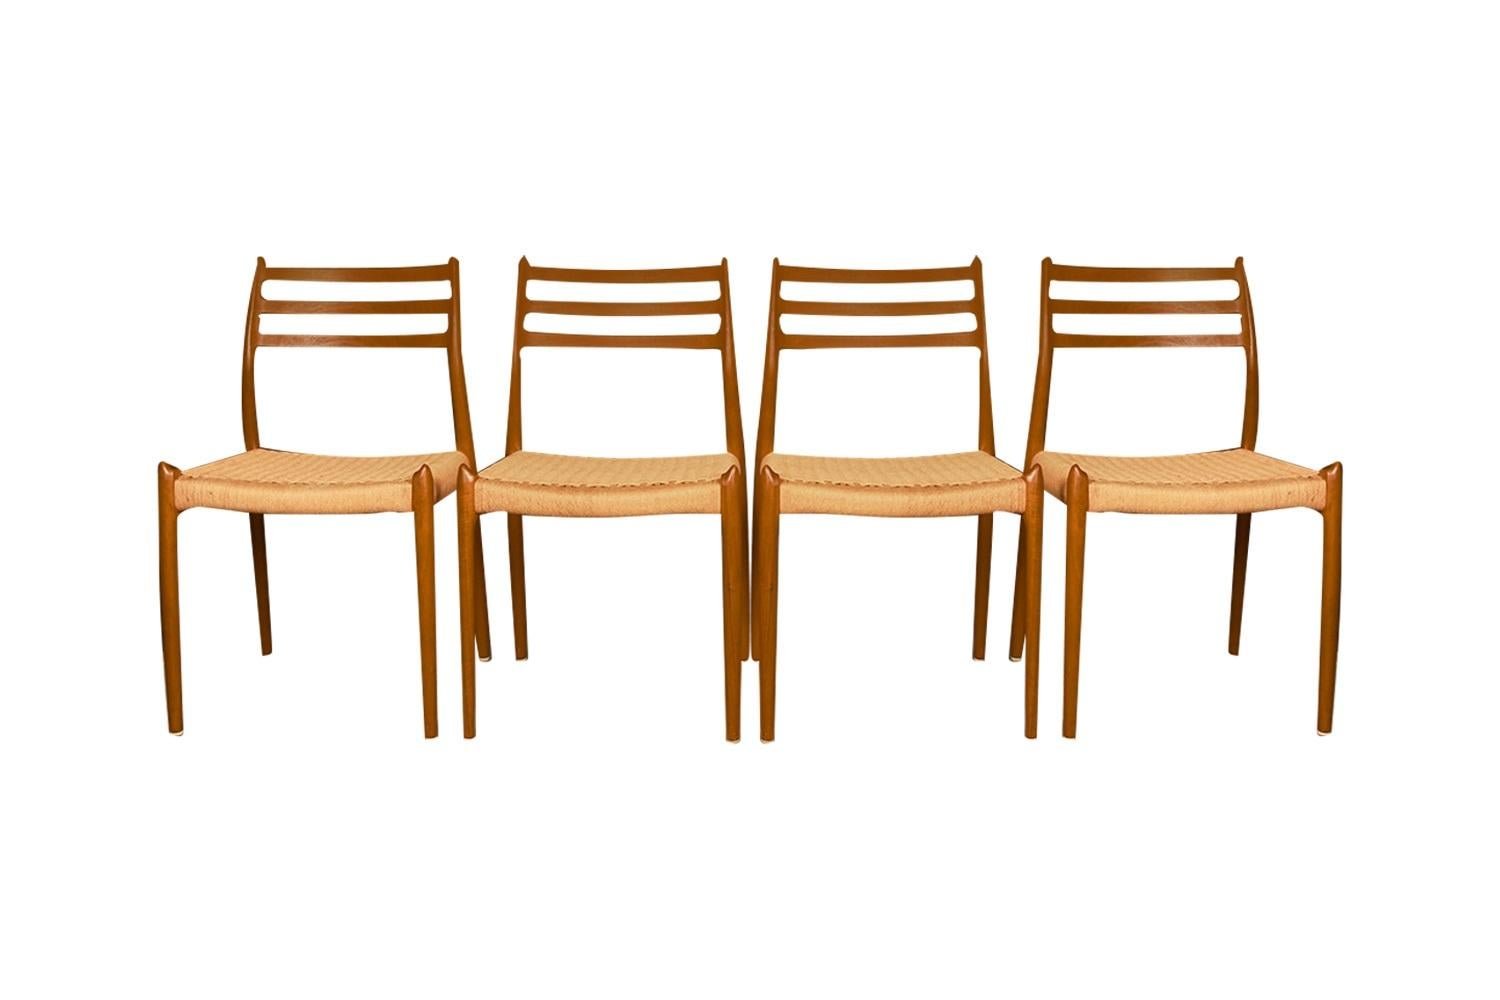 An absolutely stunning set of four Mid-Century Danish Modern dining chairs model 78 designed in 1962 by Niels Otto Moller for J.L. Møllers Møbelfabrik in Denmark. These gorgeous chairs feature beautifully sculpted teak frames and exquisite original